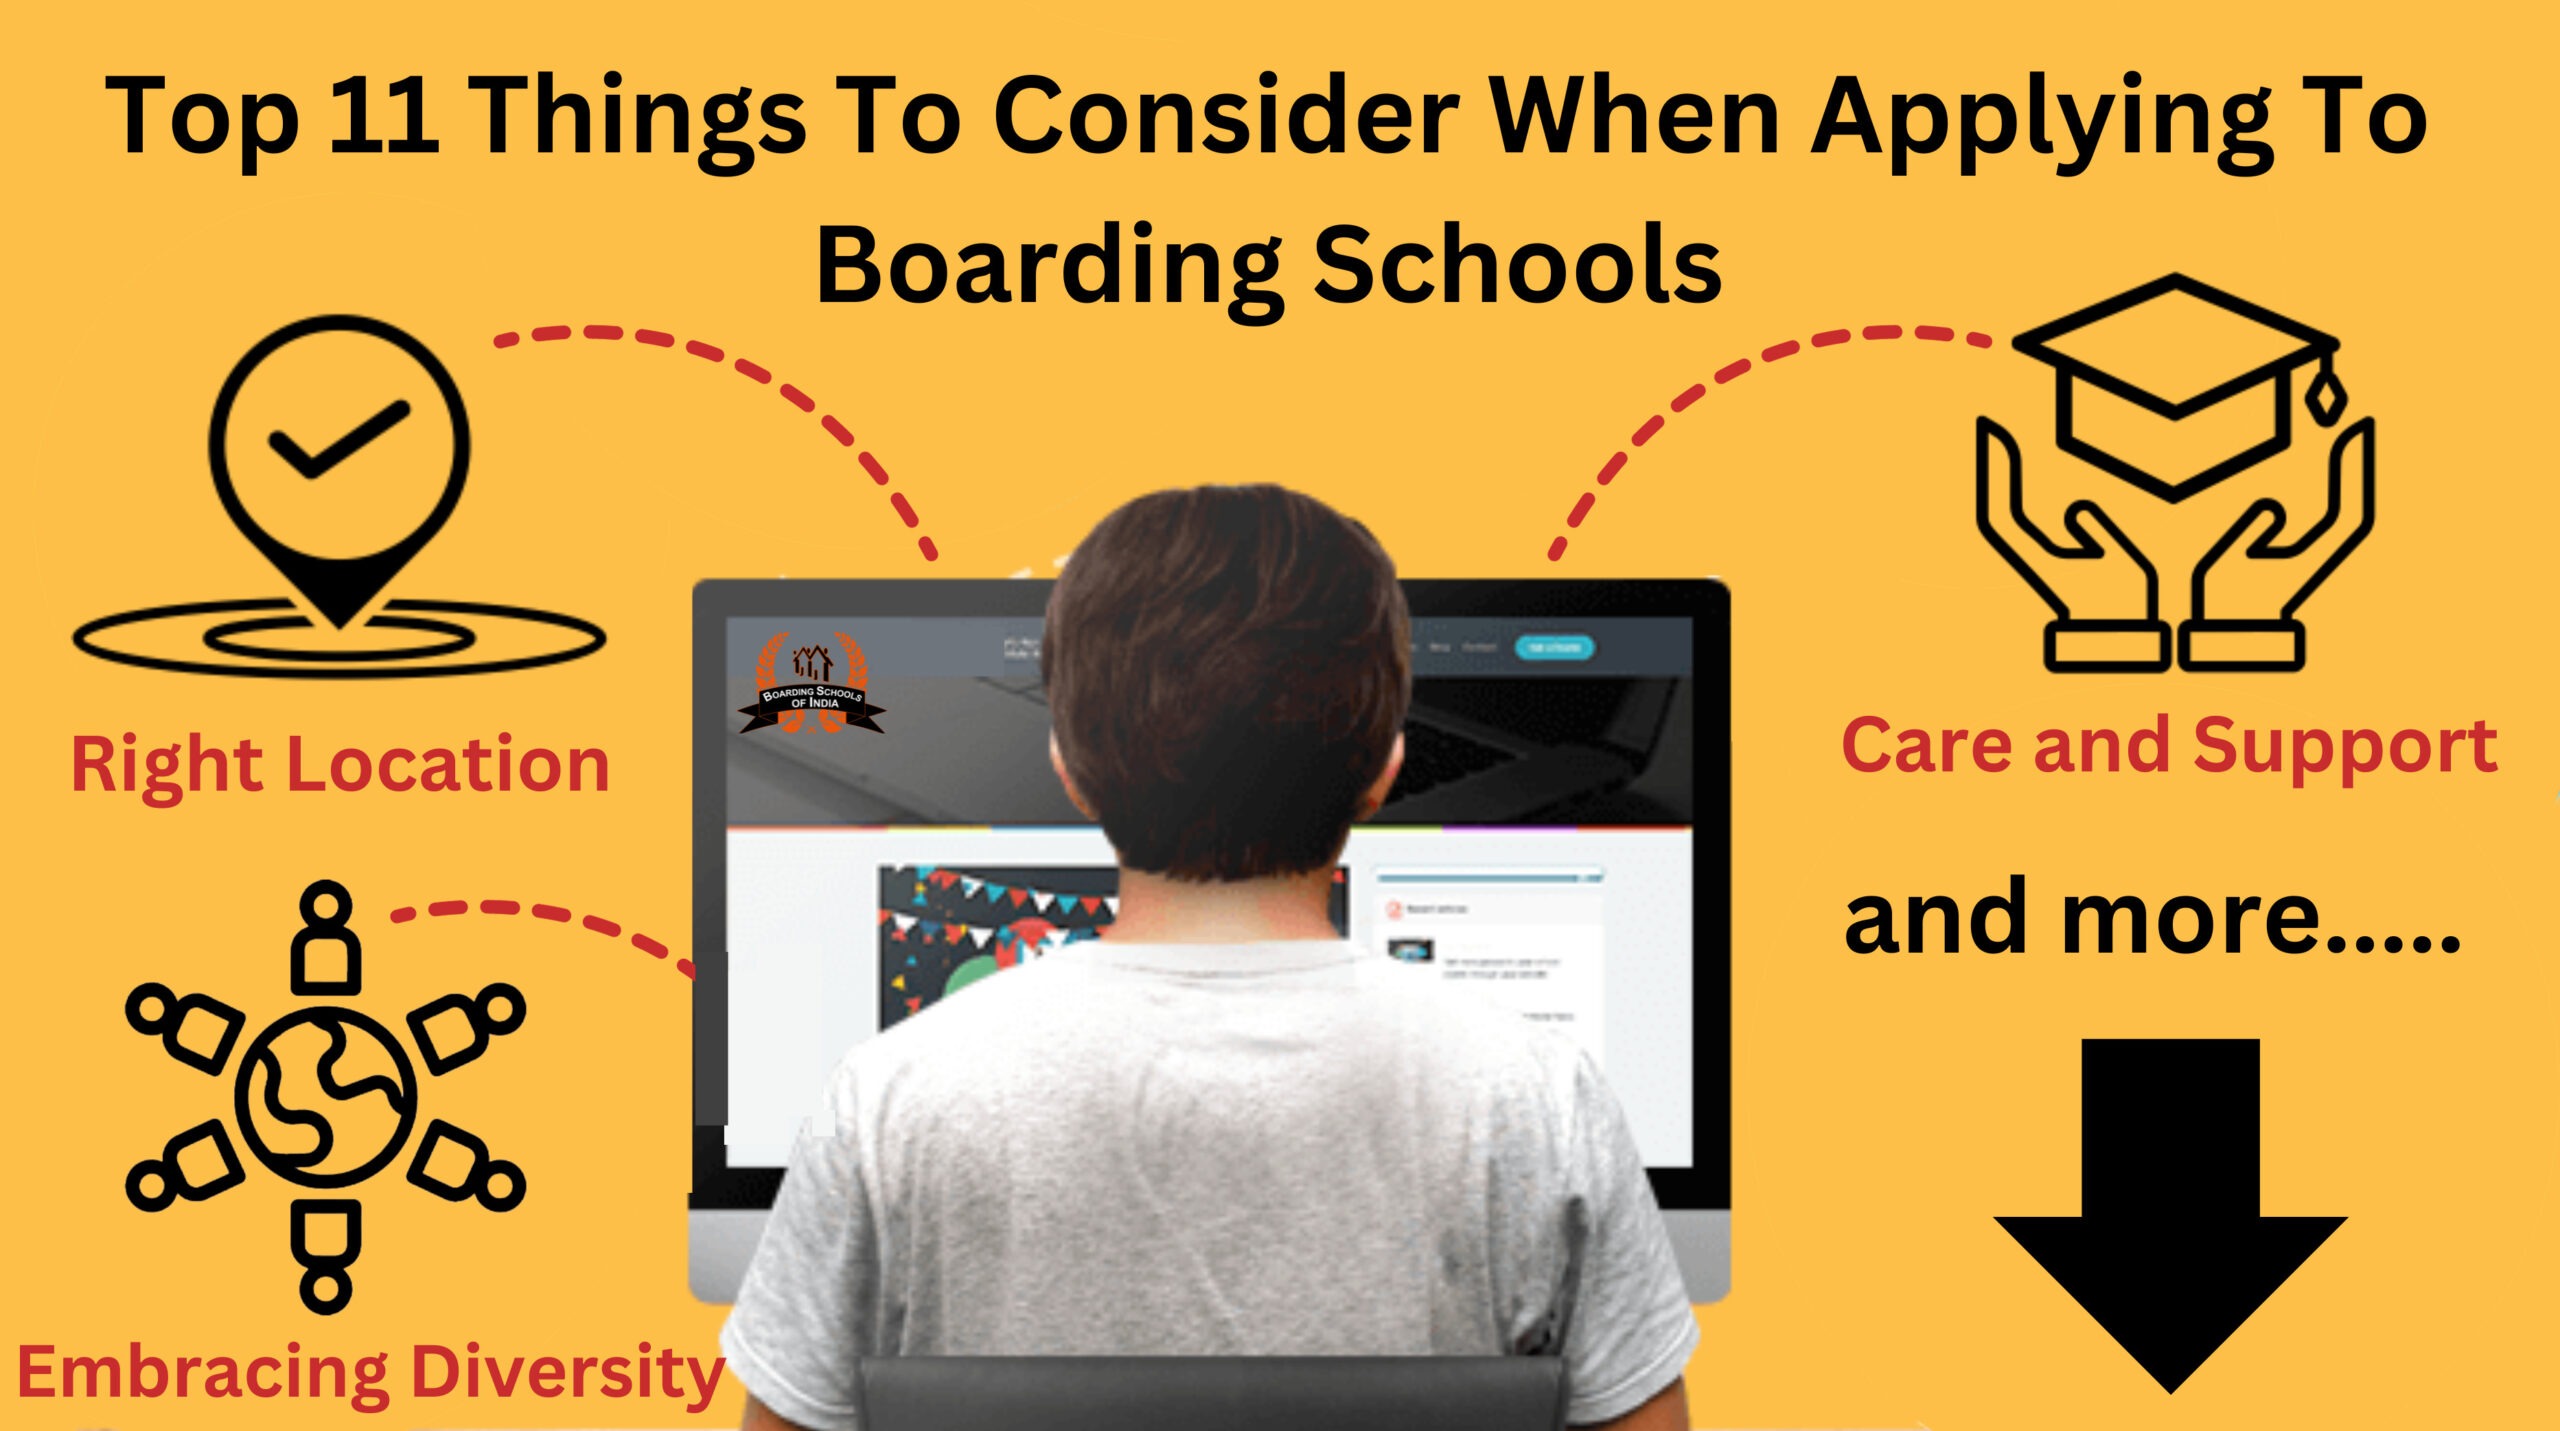 Top 11 Things to Consider When Applying to Boarding Schools